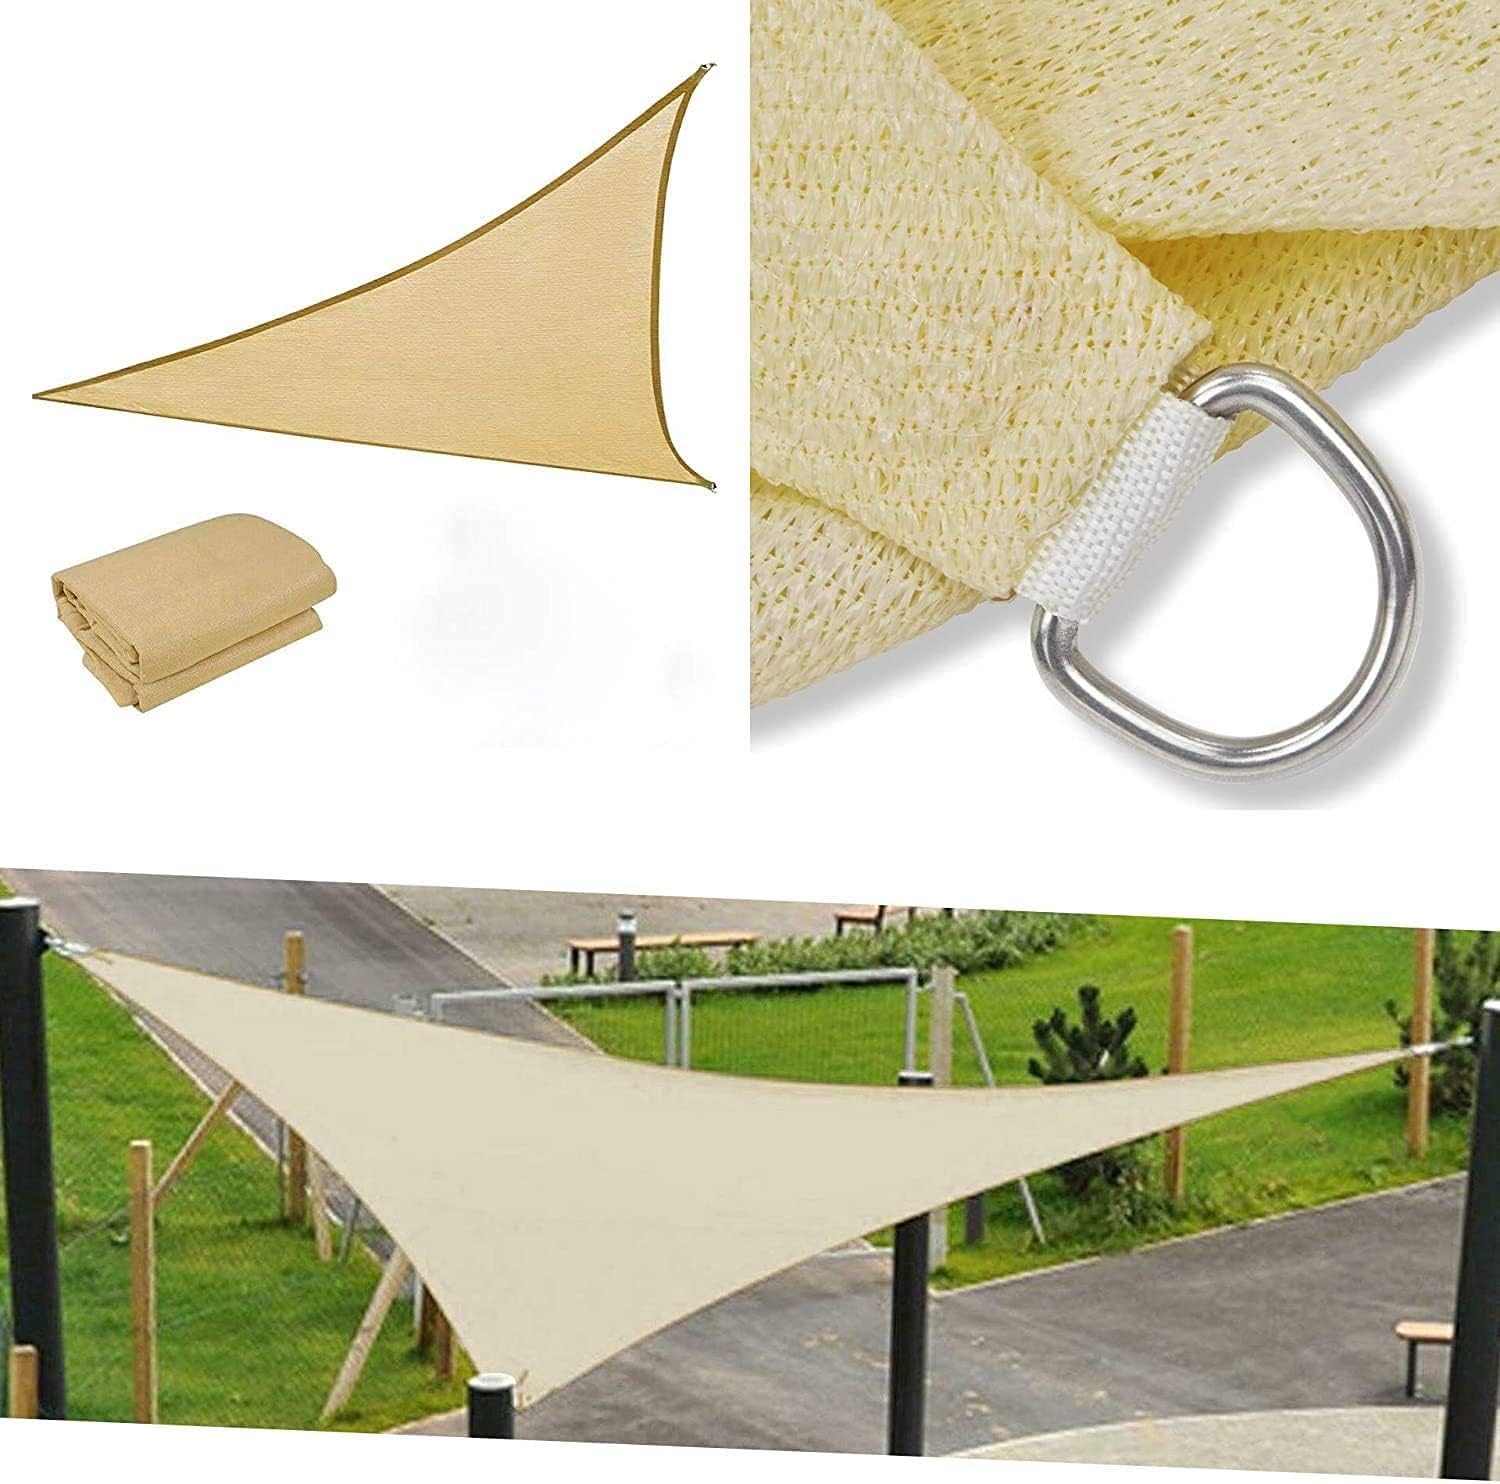 ADEPTNA Heavy Duty Triangle Sun Shade Sail for Garden Patios Decks Pools Hot Tubs Party Sunscreen Awning Canopy – UV and Mildew Resistant (SAND)